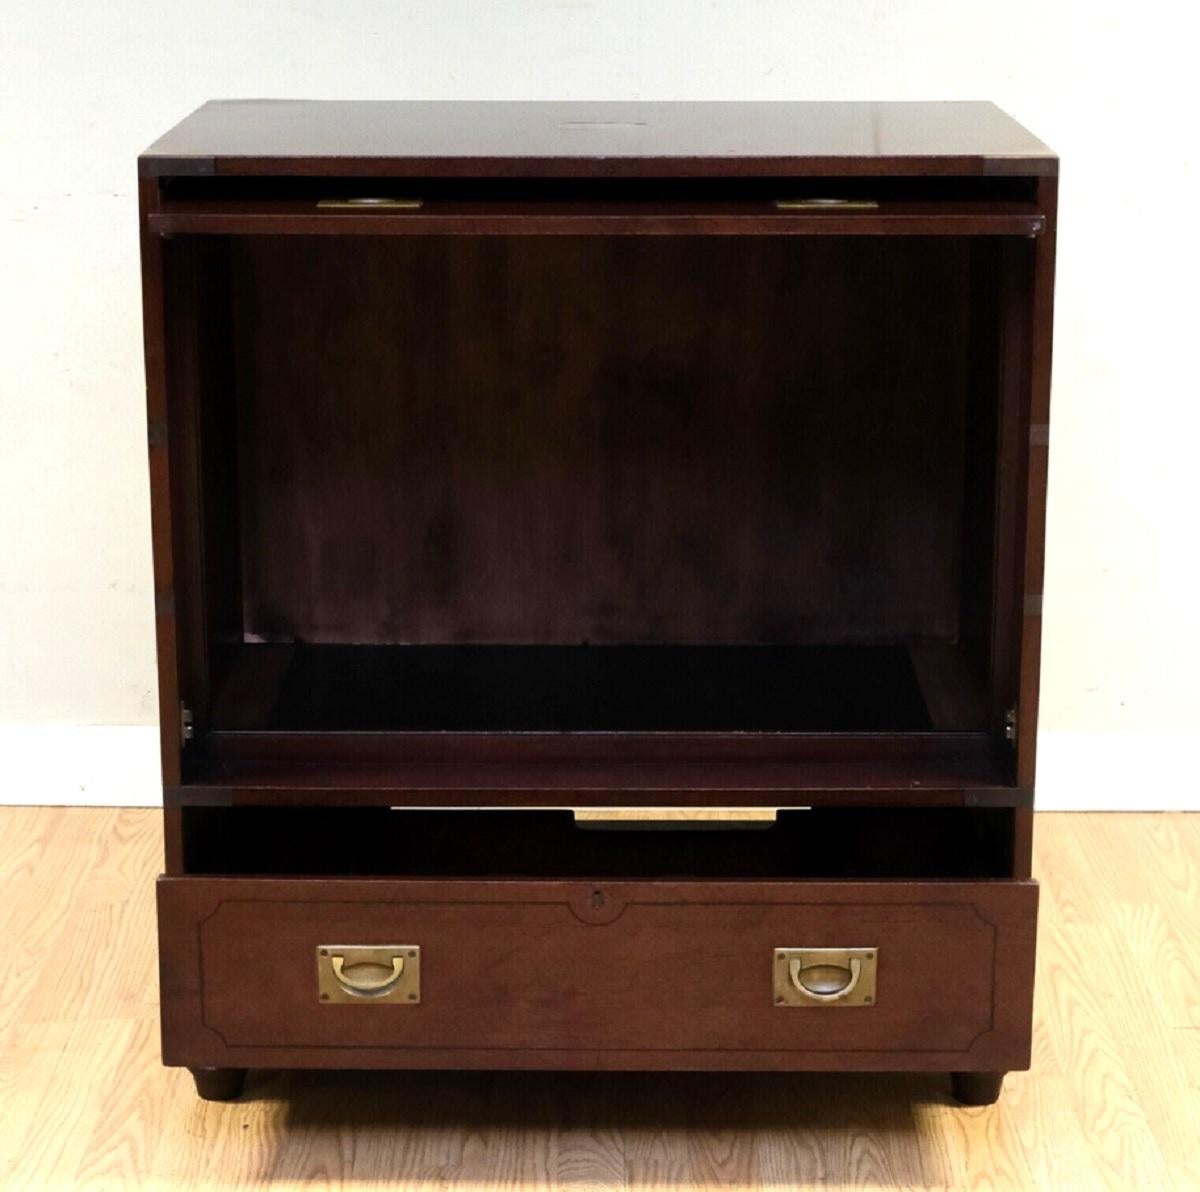 Campaign LOVELY Vintage BROWN Military CAMPAIGN TV Media STORAGE CABiNET FALSE DRAWERS For Sale